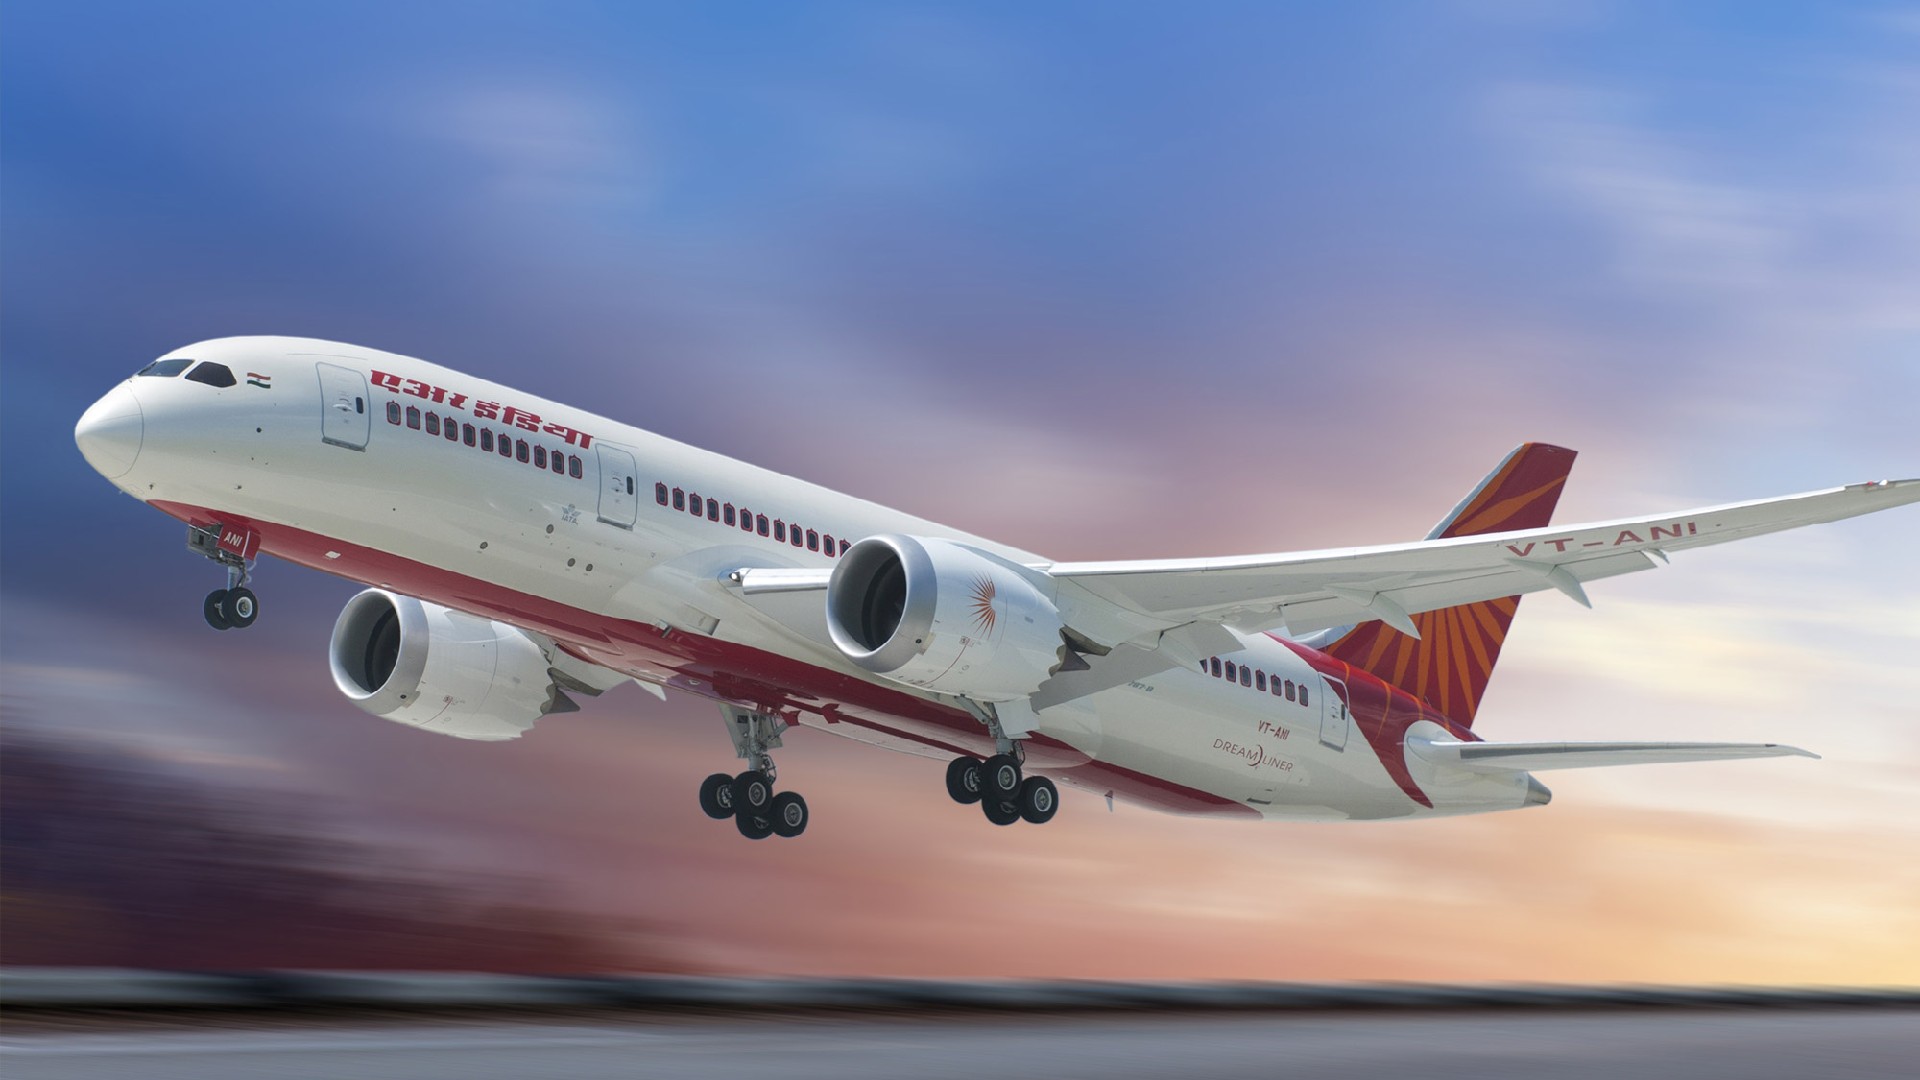 Air India Offers Waivers To Passengers Holding Tickets For International Travels